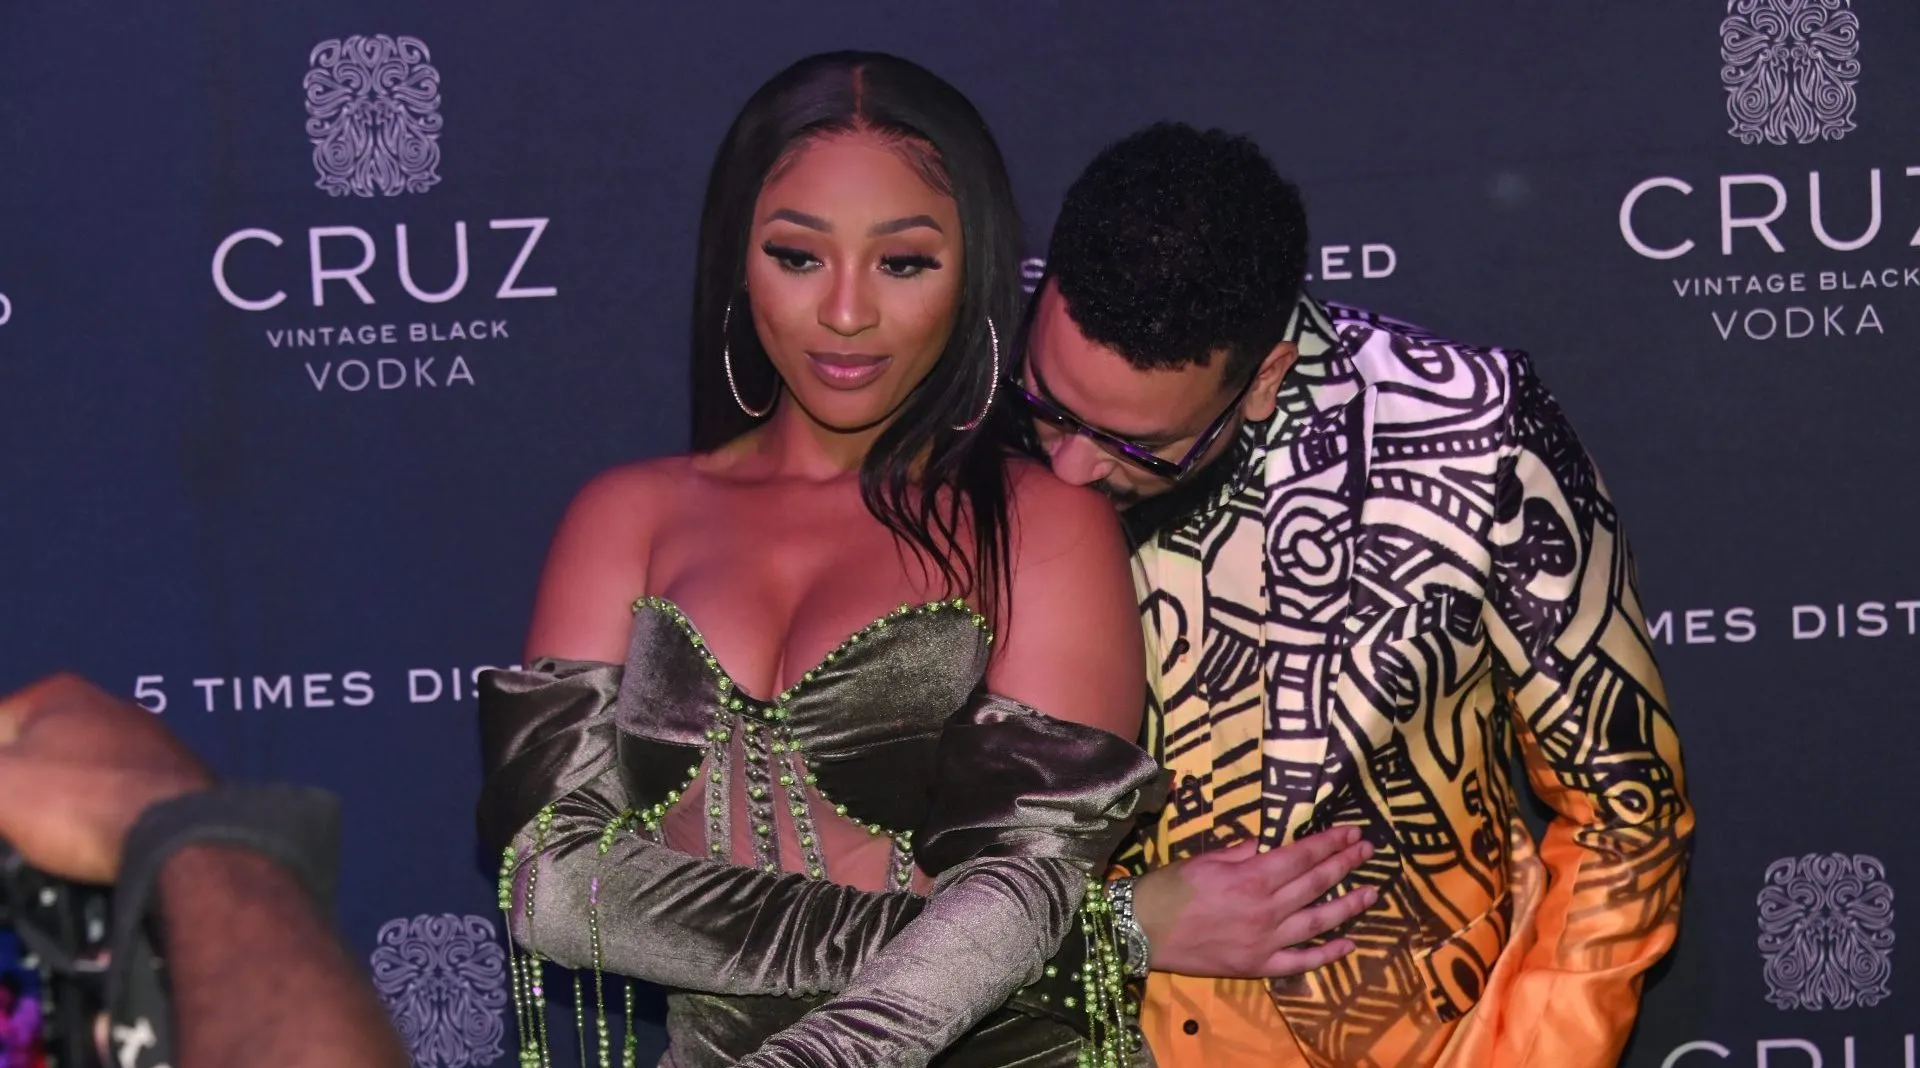 Nadia Nakai: Late AKA’s Girlfriend set to release a Tribute Song ‘Never Leave’